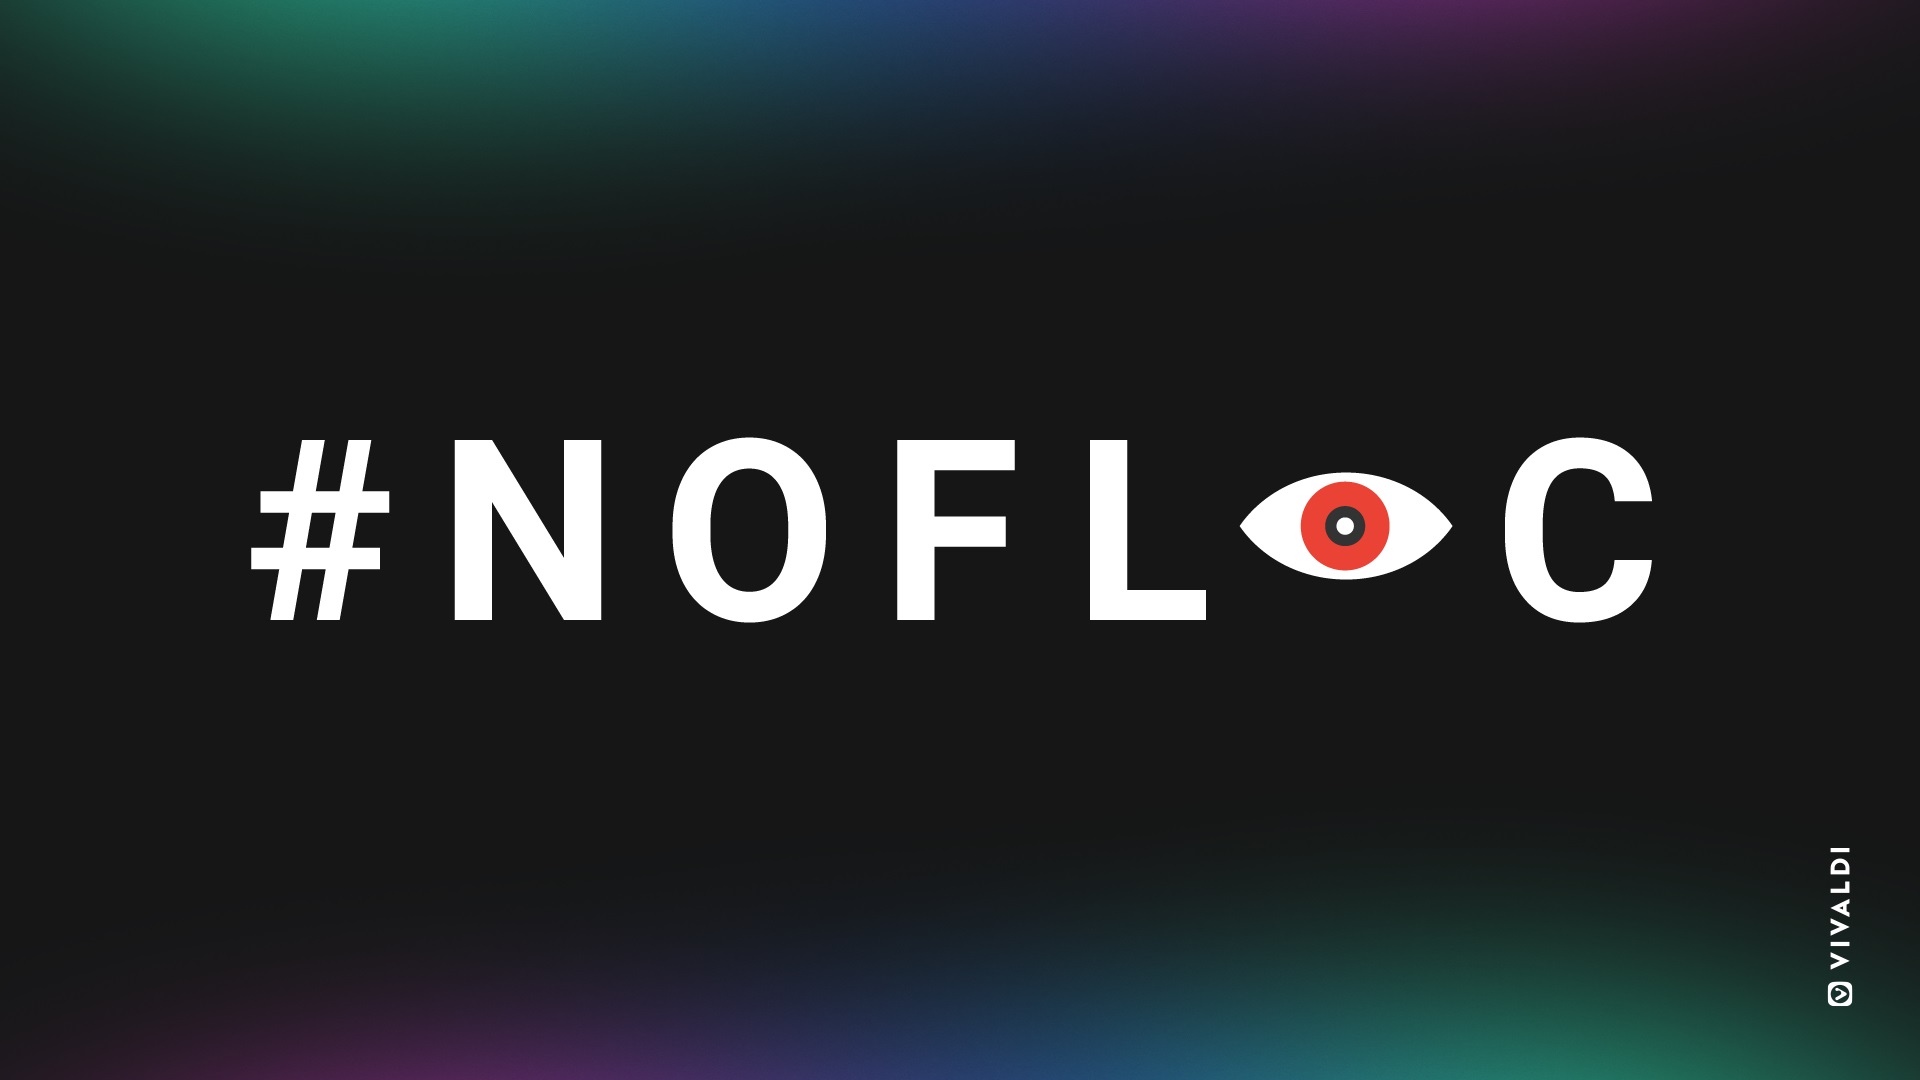 #NoFLoC campaign by Vivaldi browser, showing the hashtag on a dark background